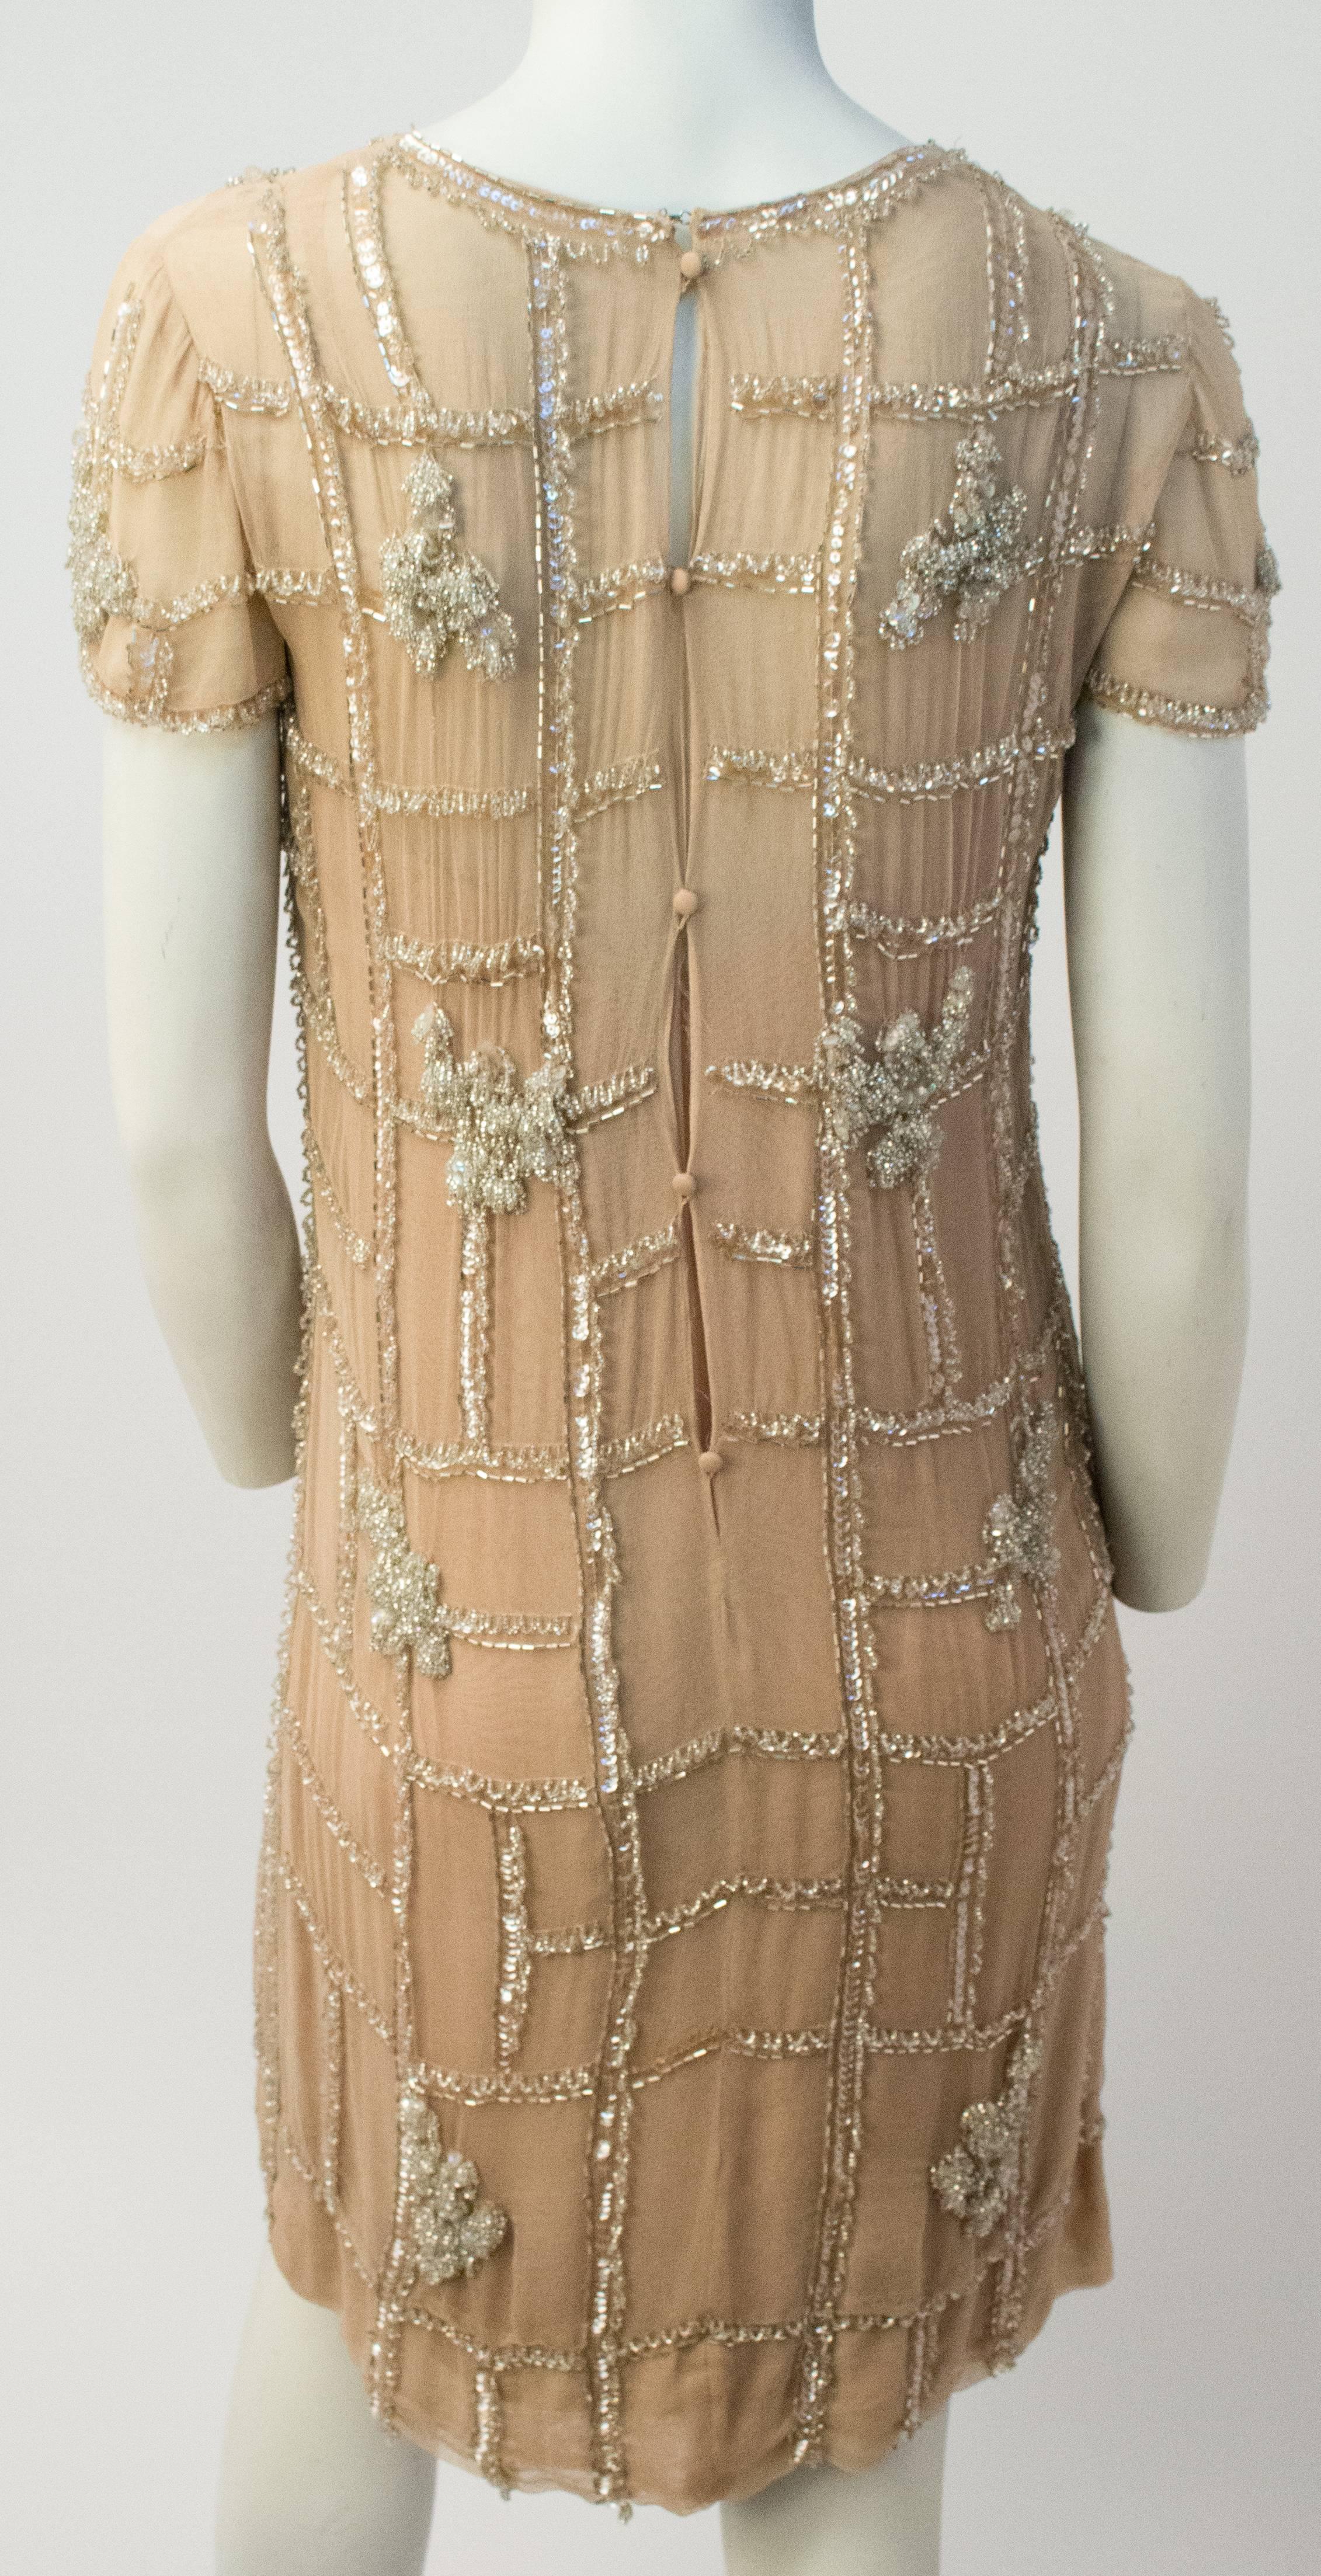 60s Malcom Starr Beaded Nude Cocktail Dress. Dress consists of an outer layer of sheer beaded jersey over nude silk crepe. Lining zips up back with metal zipper, outer closes using covered buttons. 